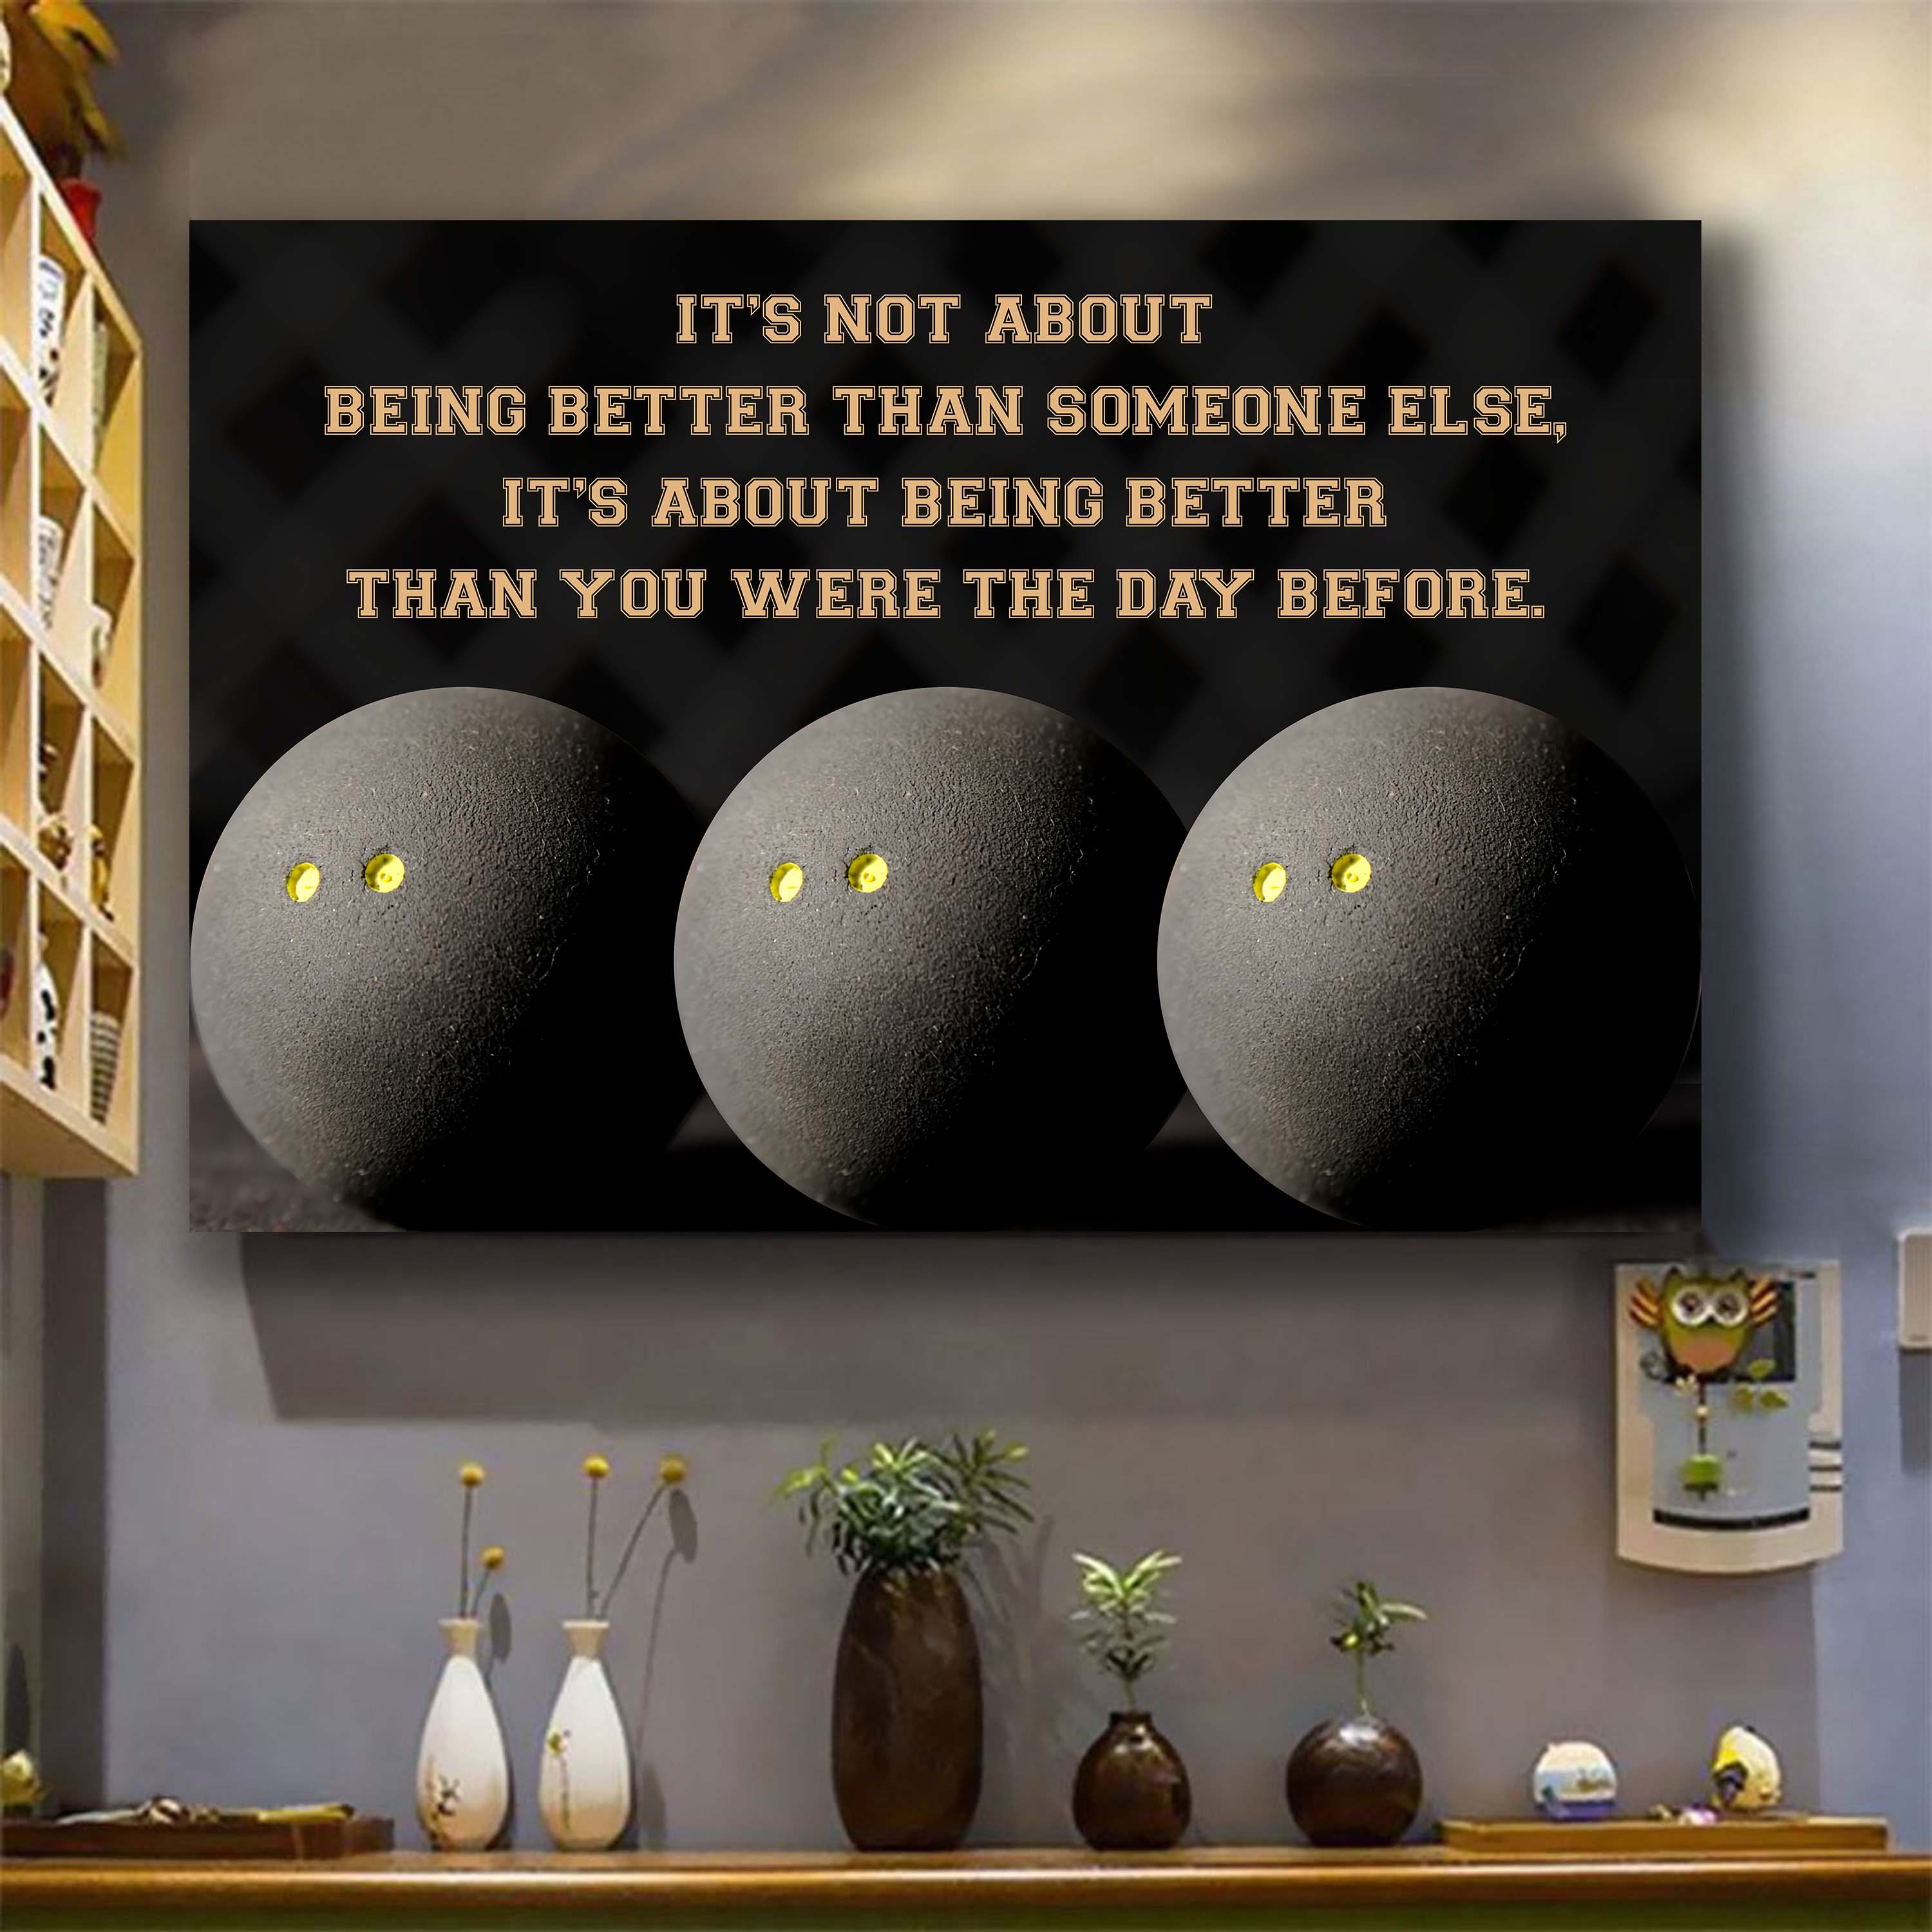 Squash Ball customizable poster canvas - It is not about better than someone else, It is about being better than you were the day before